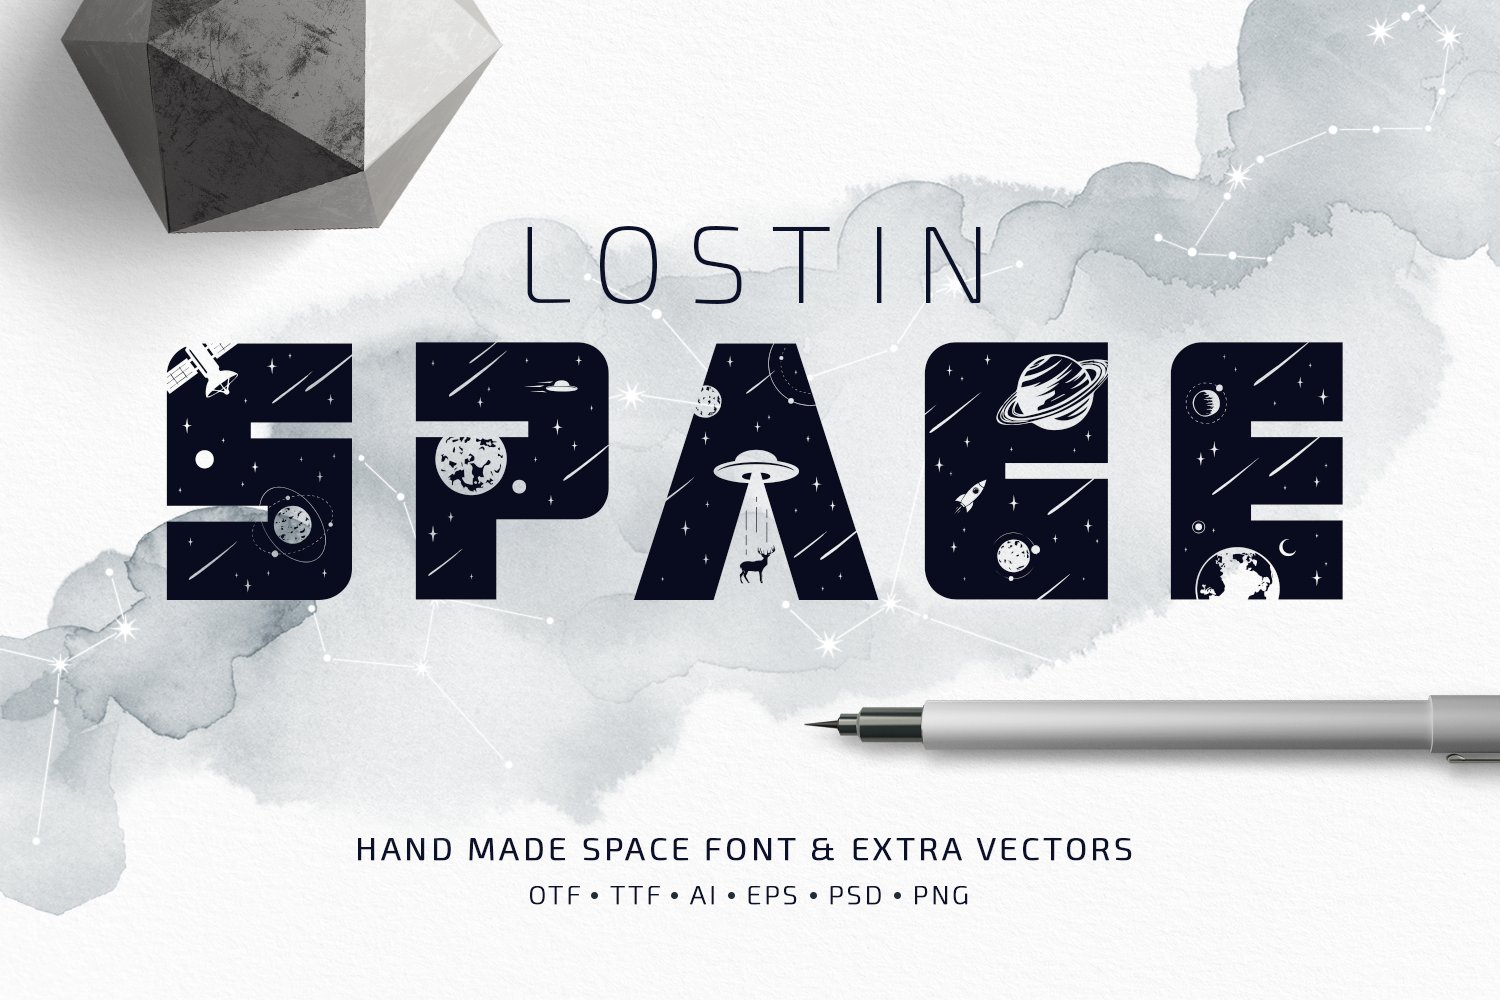 Lost In Space. Colored Font (SVG) cover image.